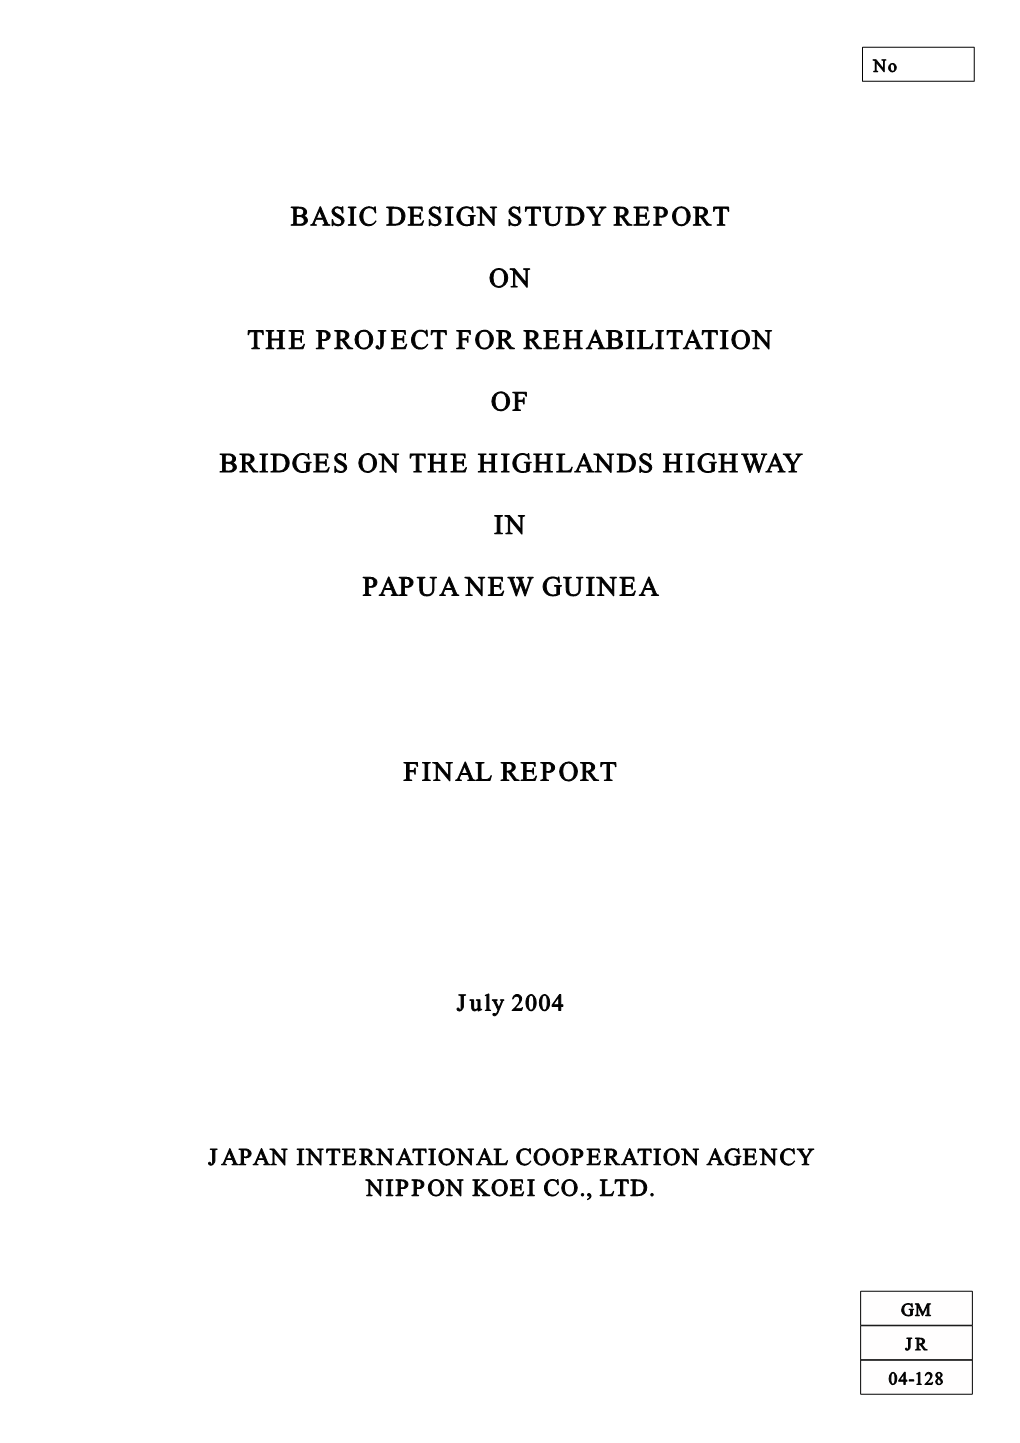 Basic Design Study Report on the Project for Rehabilitation of Bridges on the Highlands Highway in Papua New Guinea